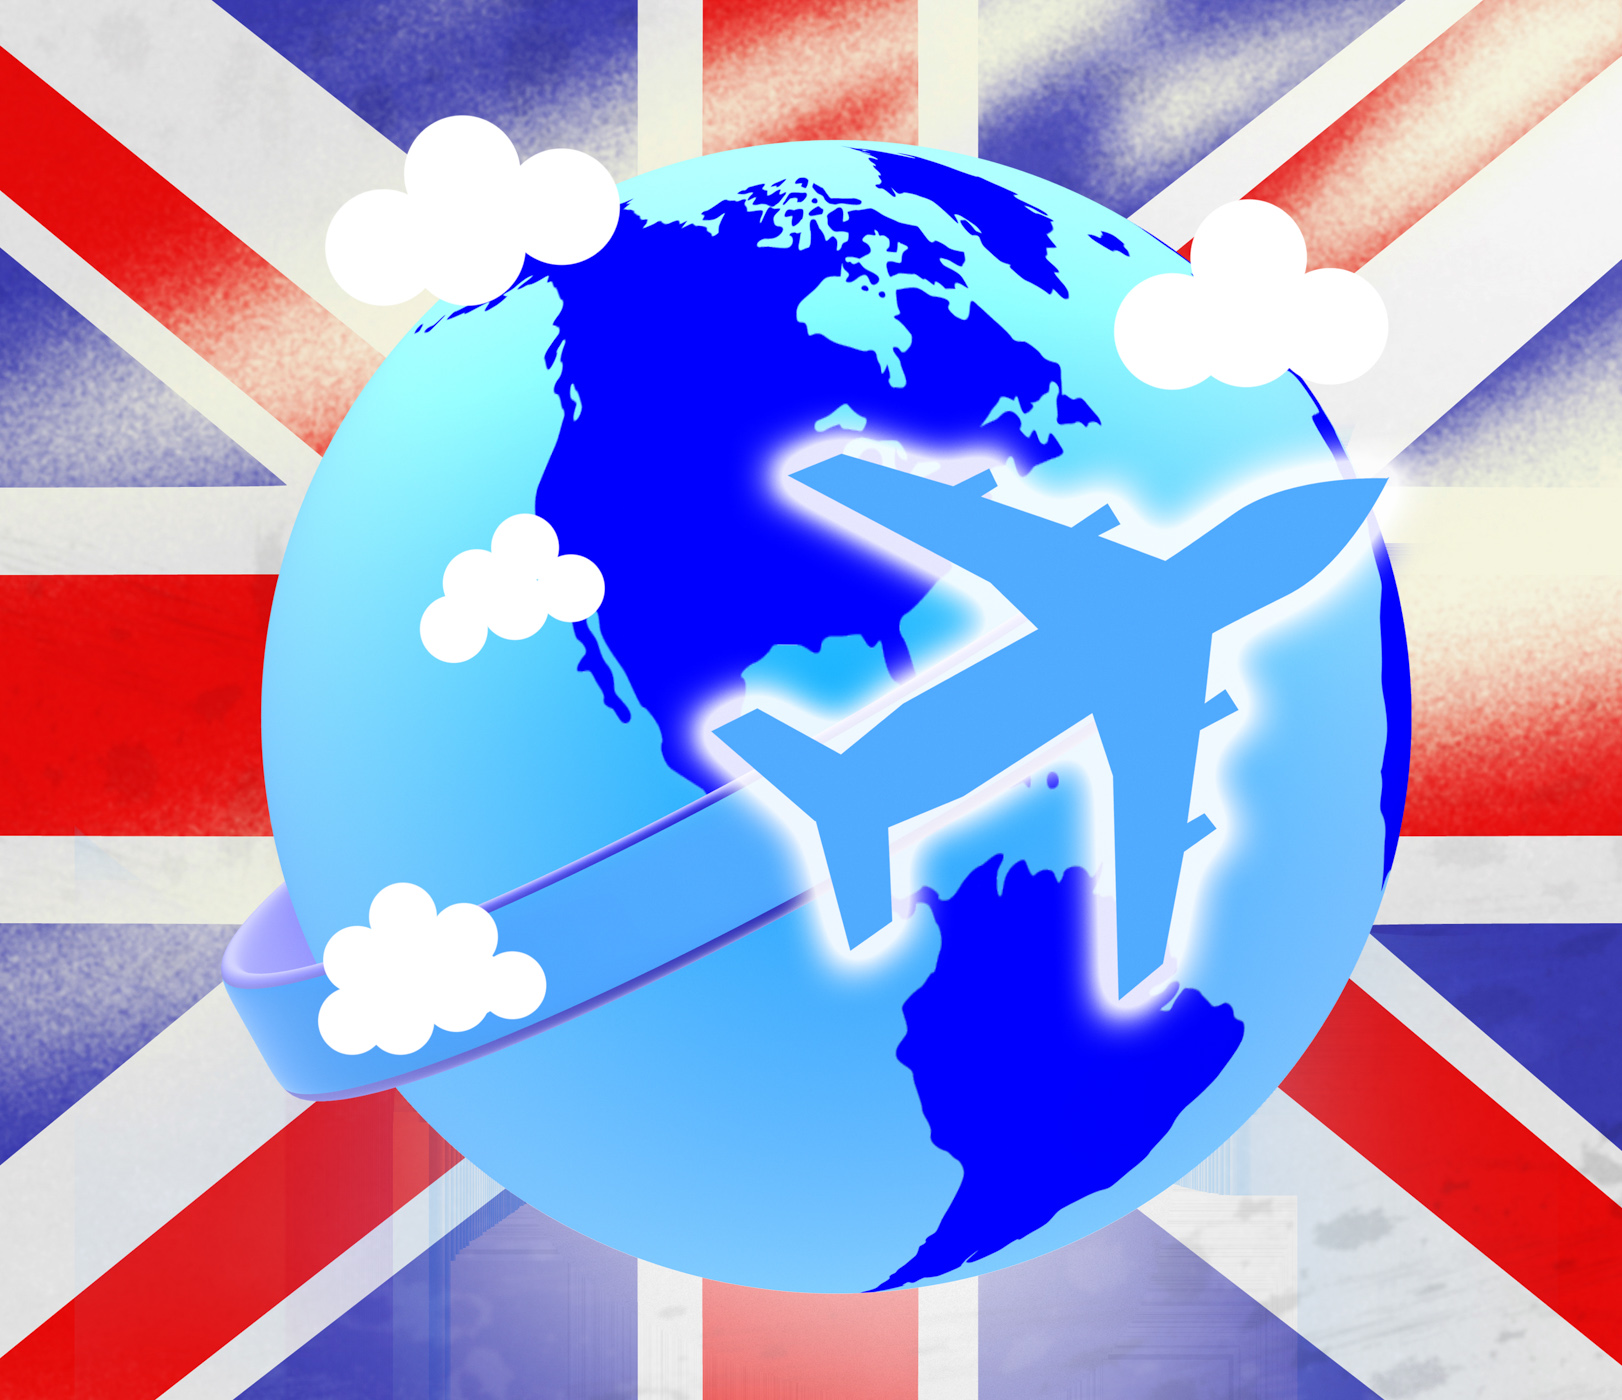 Union jack represents english flag and airline photo